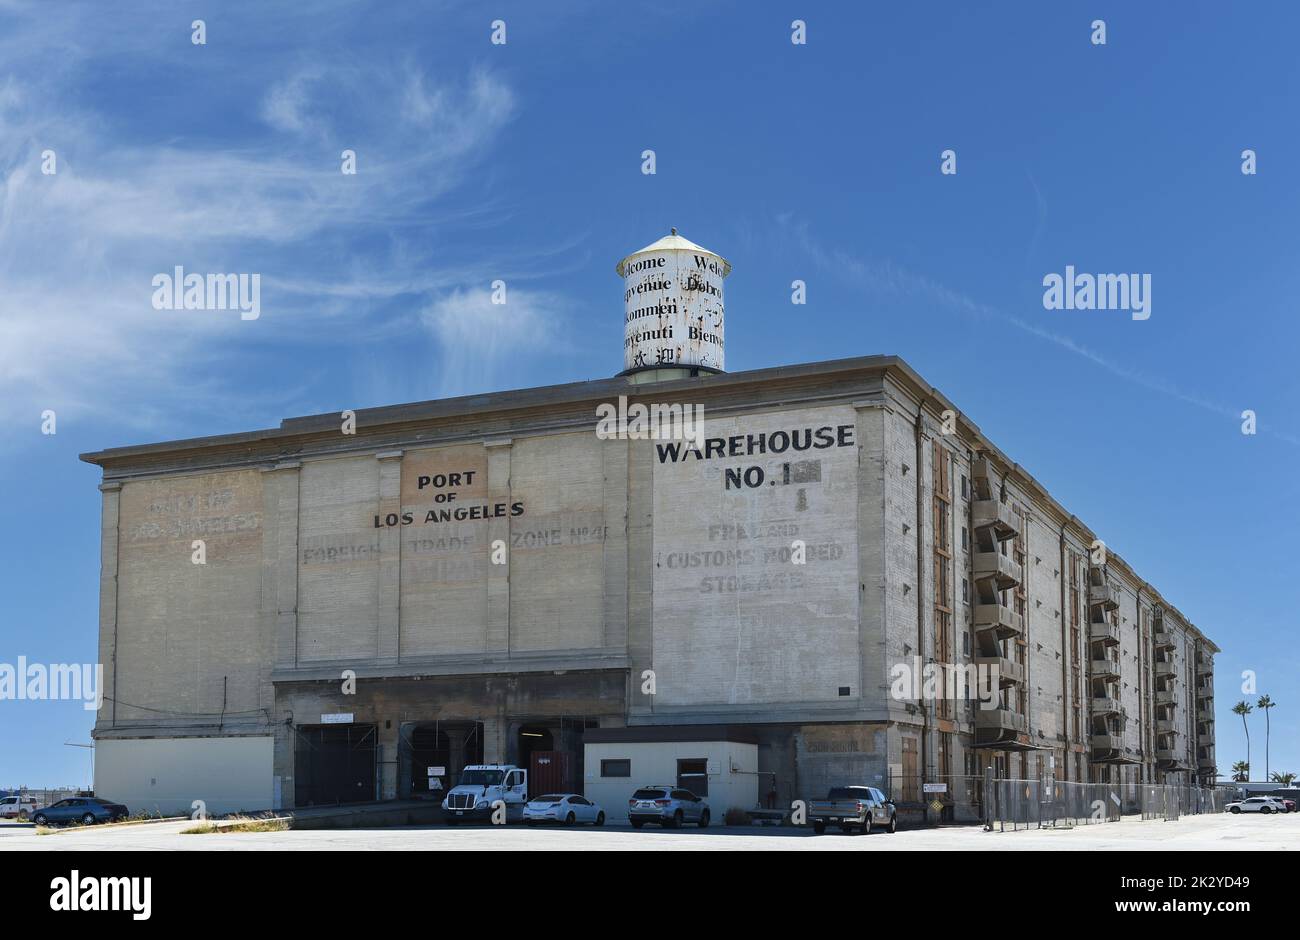 SAN PEDRO, CALIFORNIA - 21 SEPT 2022: Warehouse No. 1, a six story warehouse built in 1917 on the outermost point of land on the main channel at the P Stock Photo